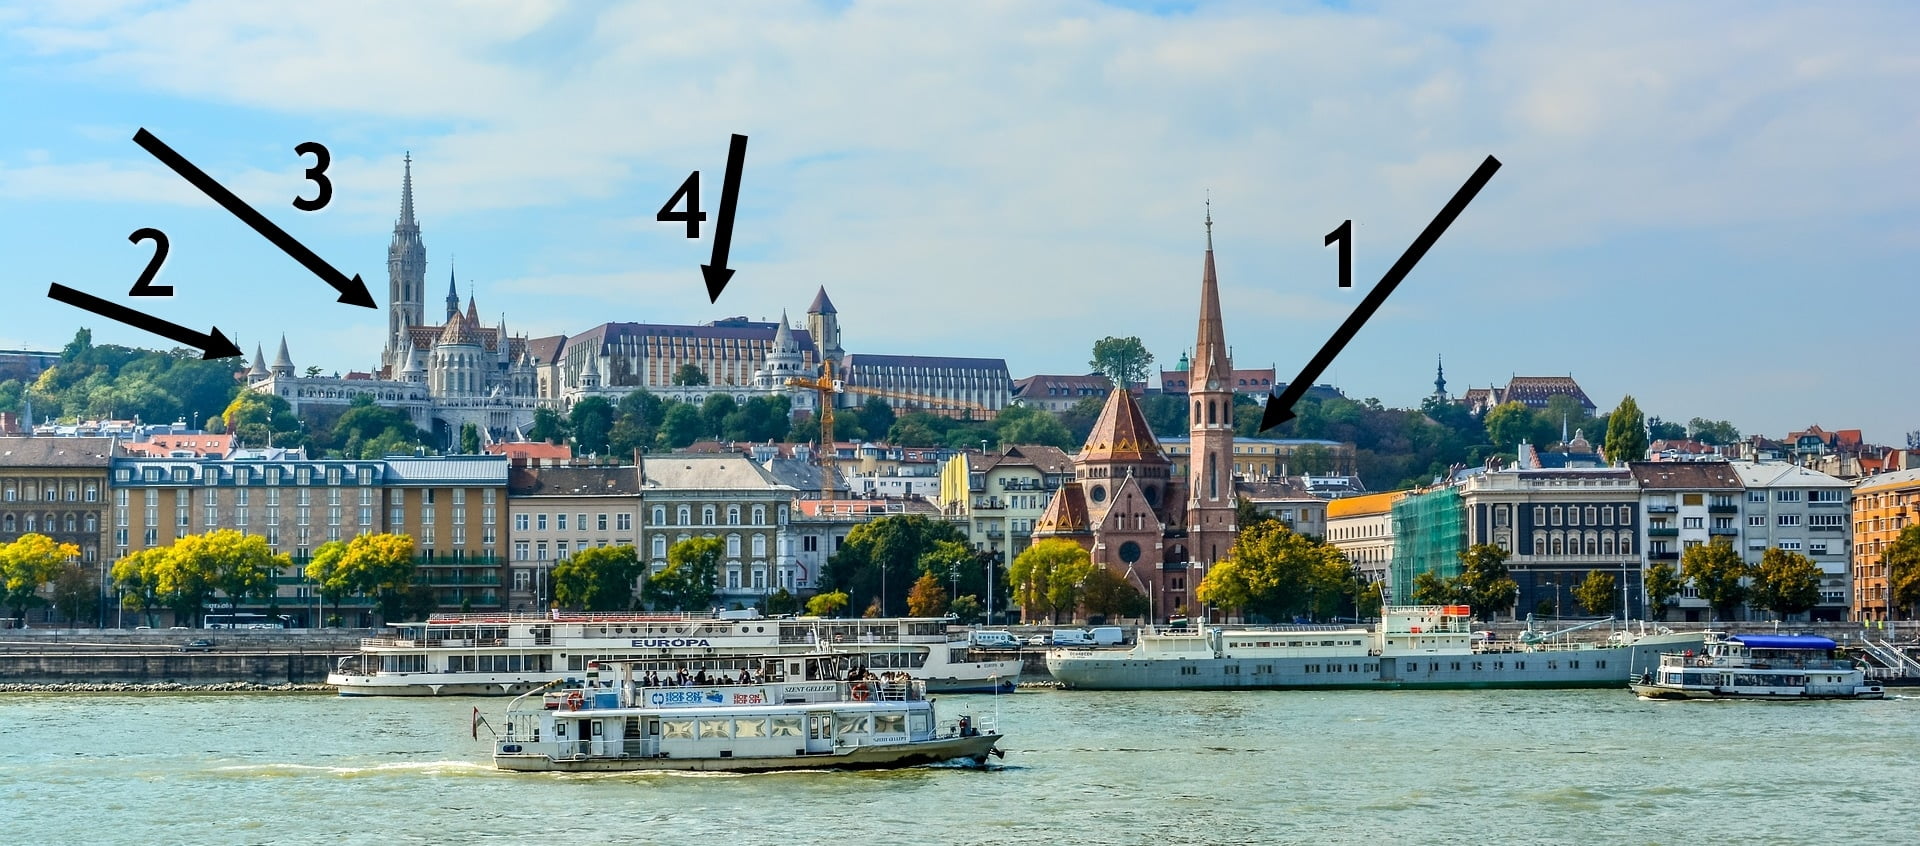 Panorama towards the Buda side from tram line 2 - Source: Pixabay